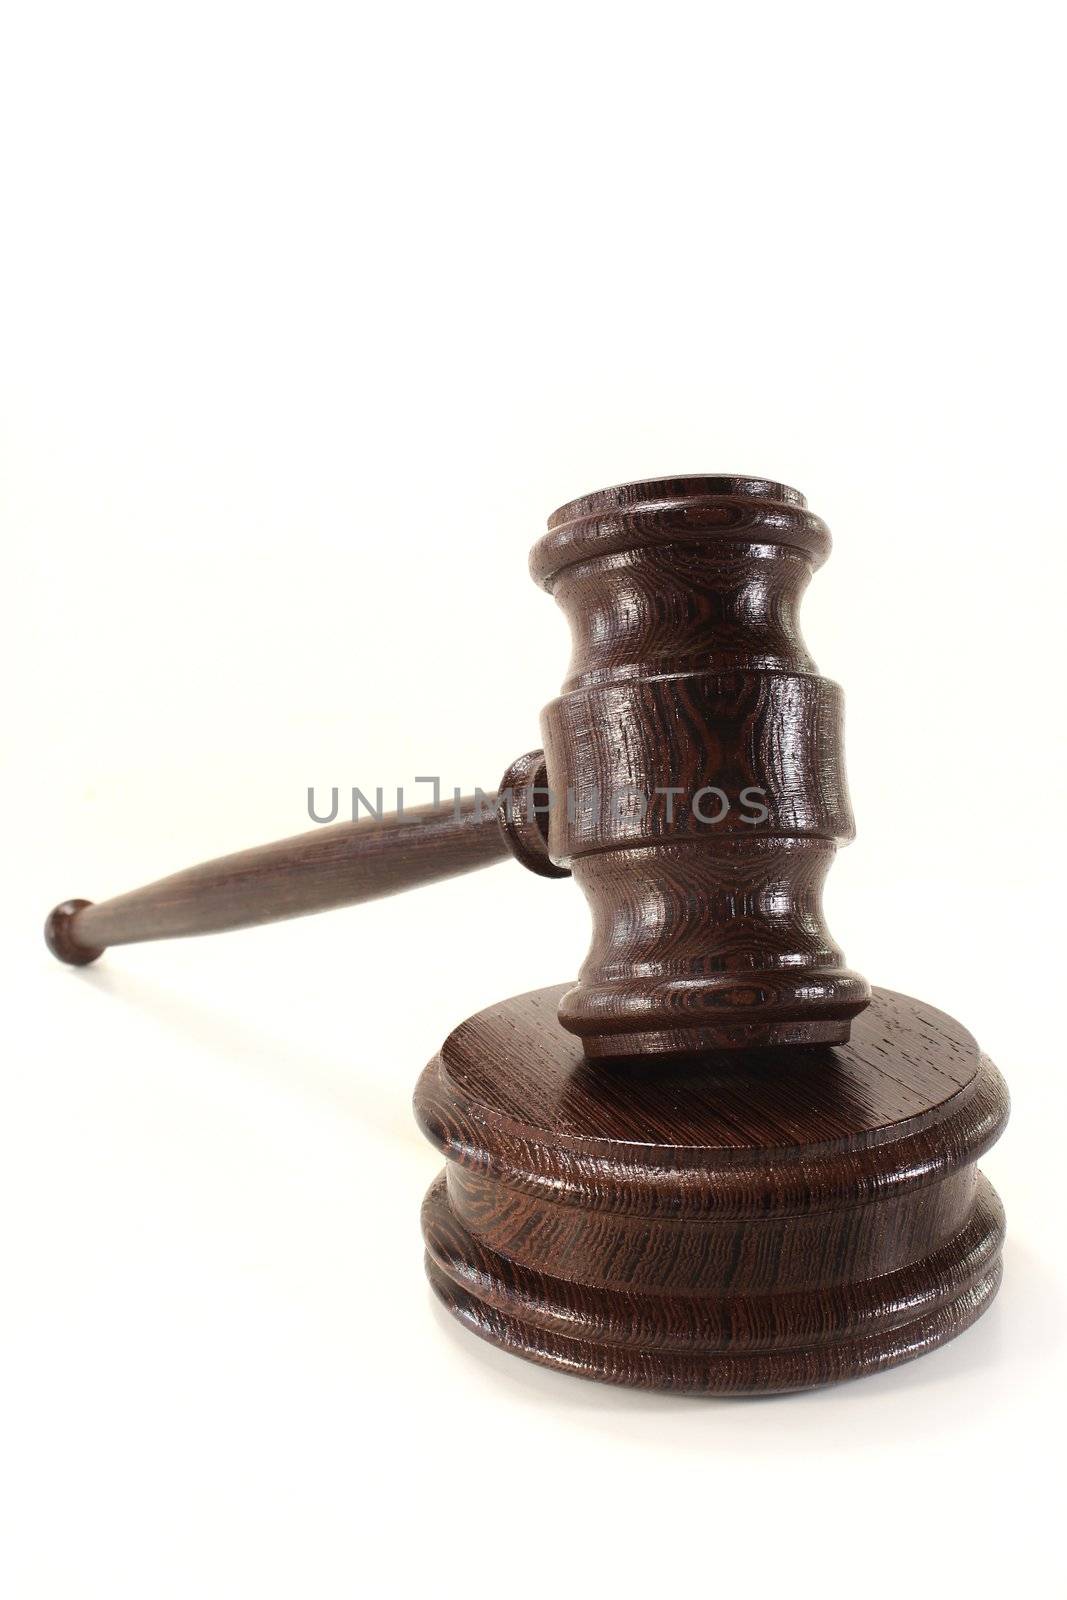 a brown judge's gavel on a white background